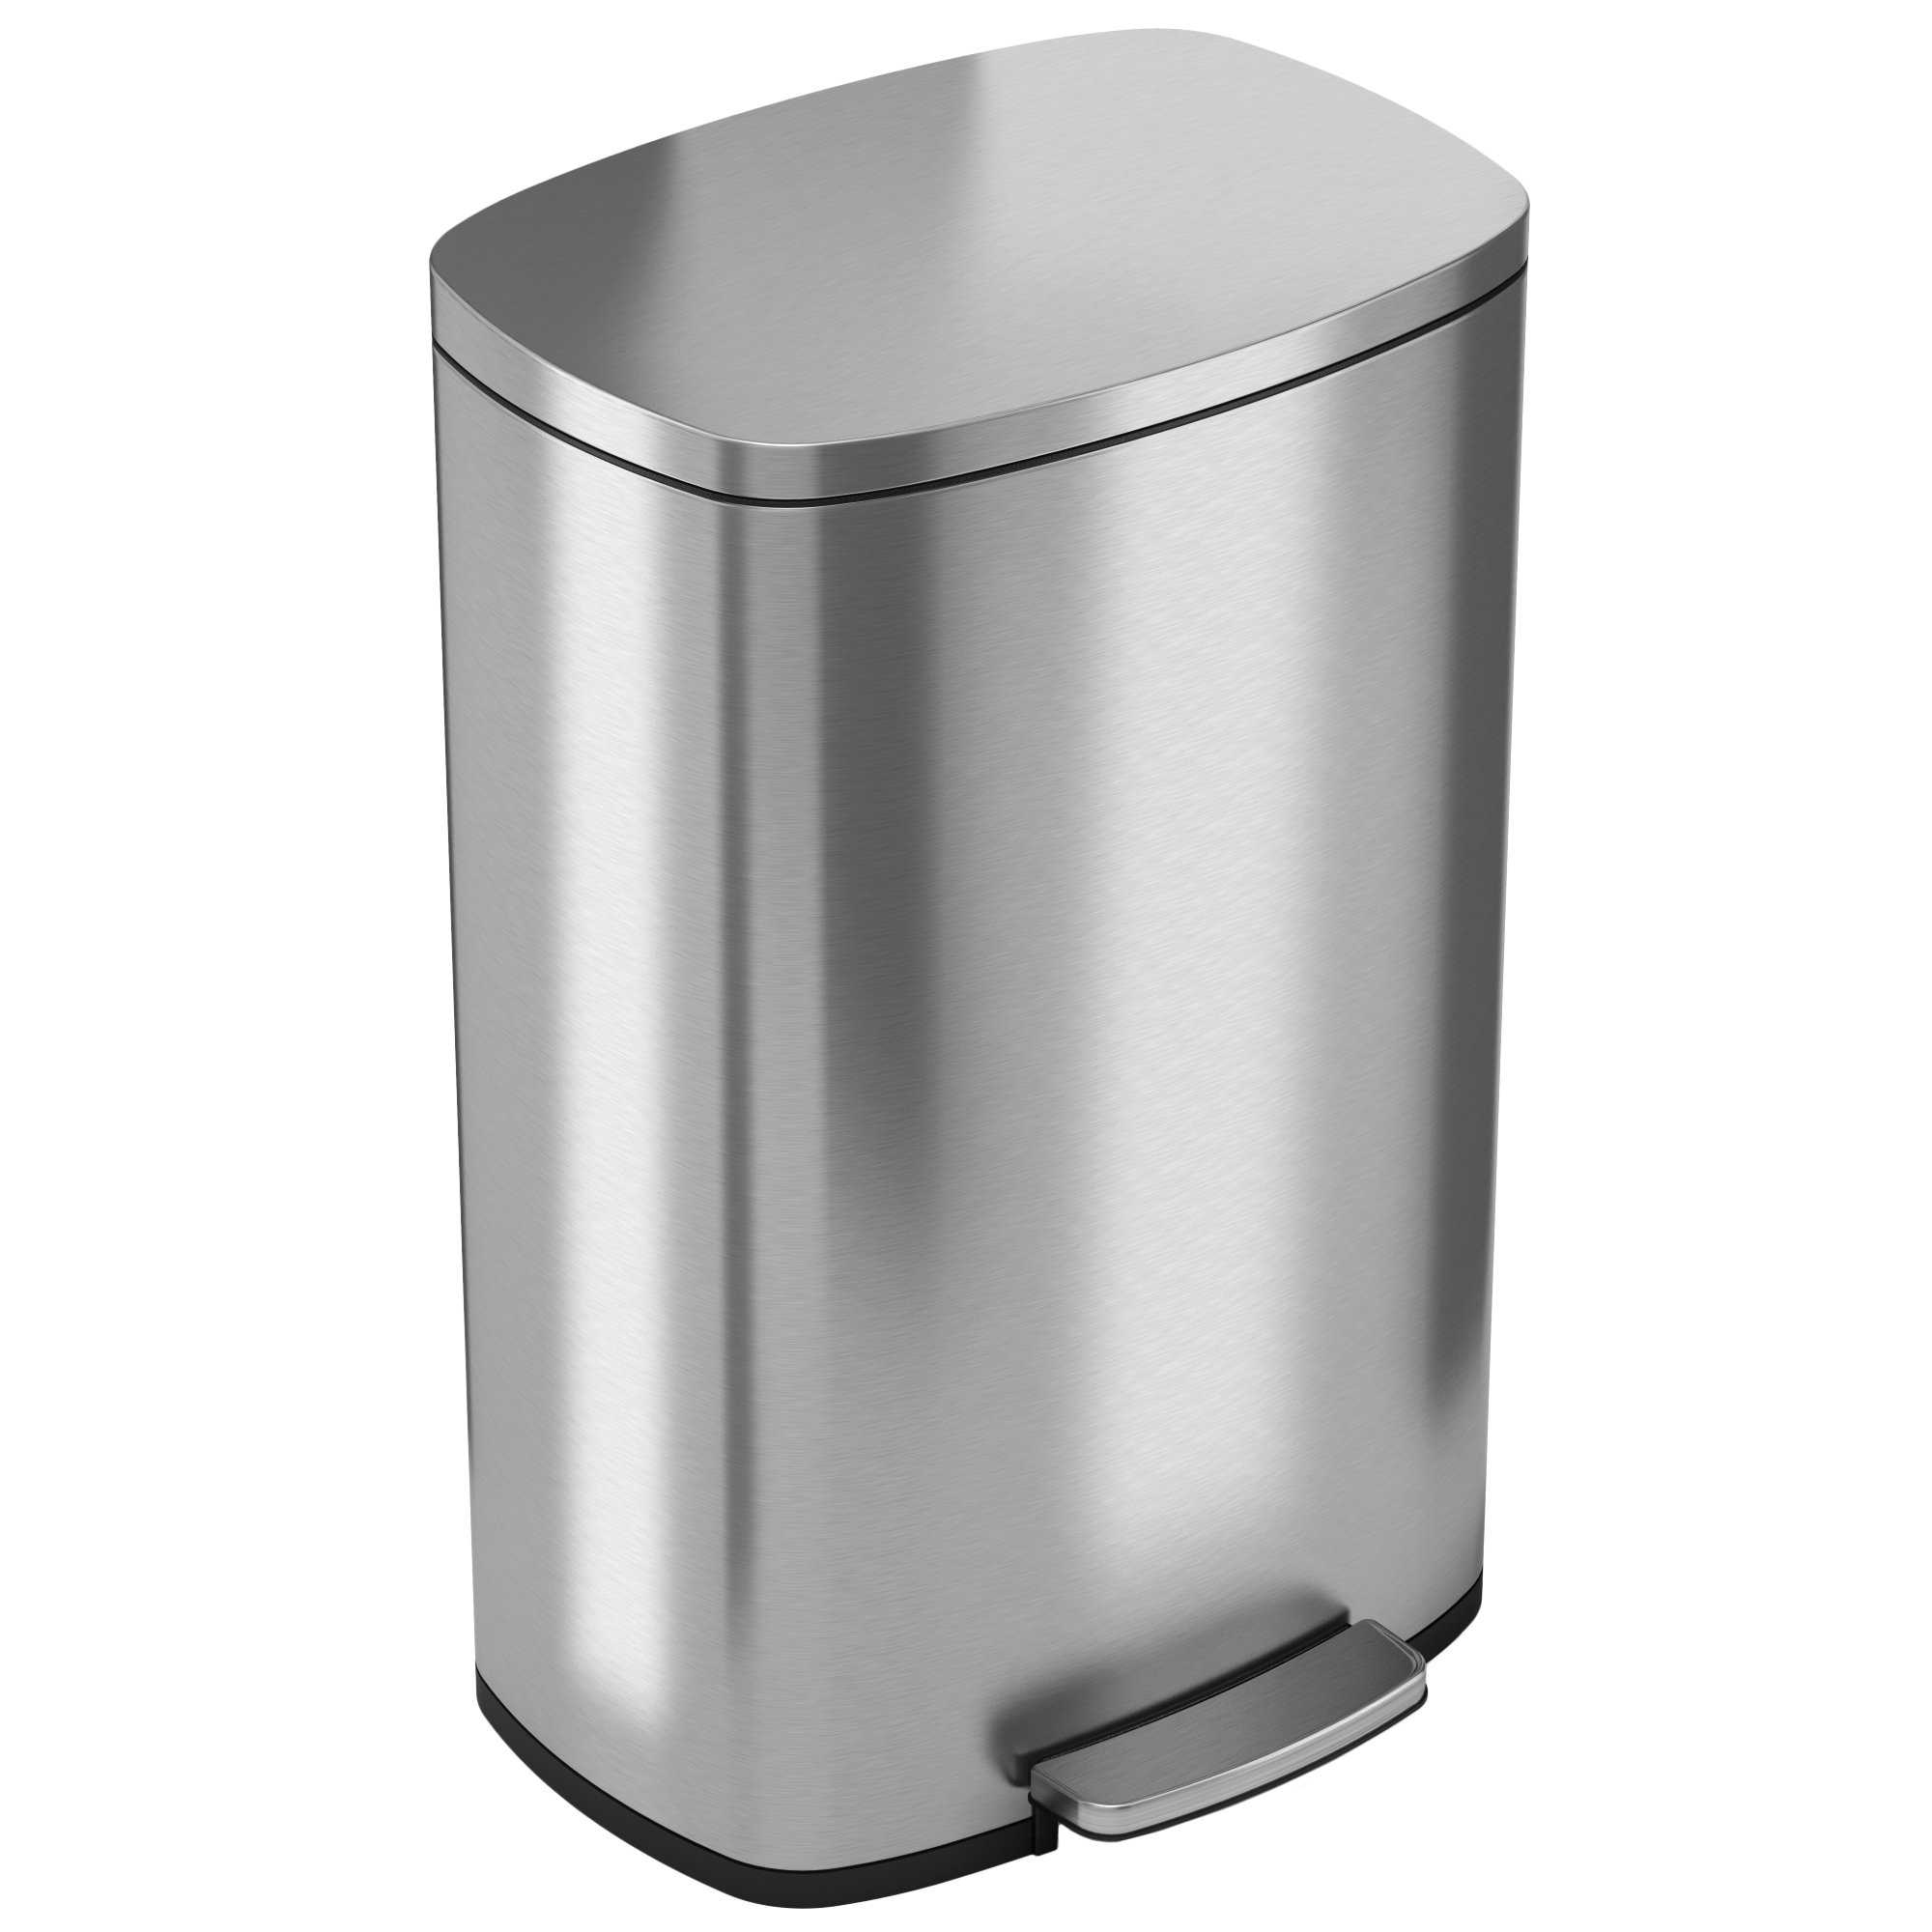 SoftStep Deodorizer Stainless Steel 13 Gallon Step on Trash Can